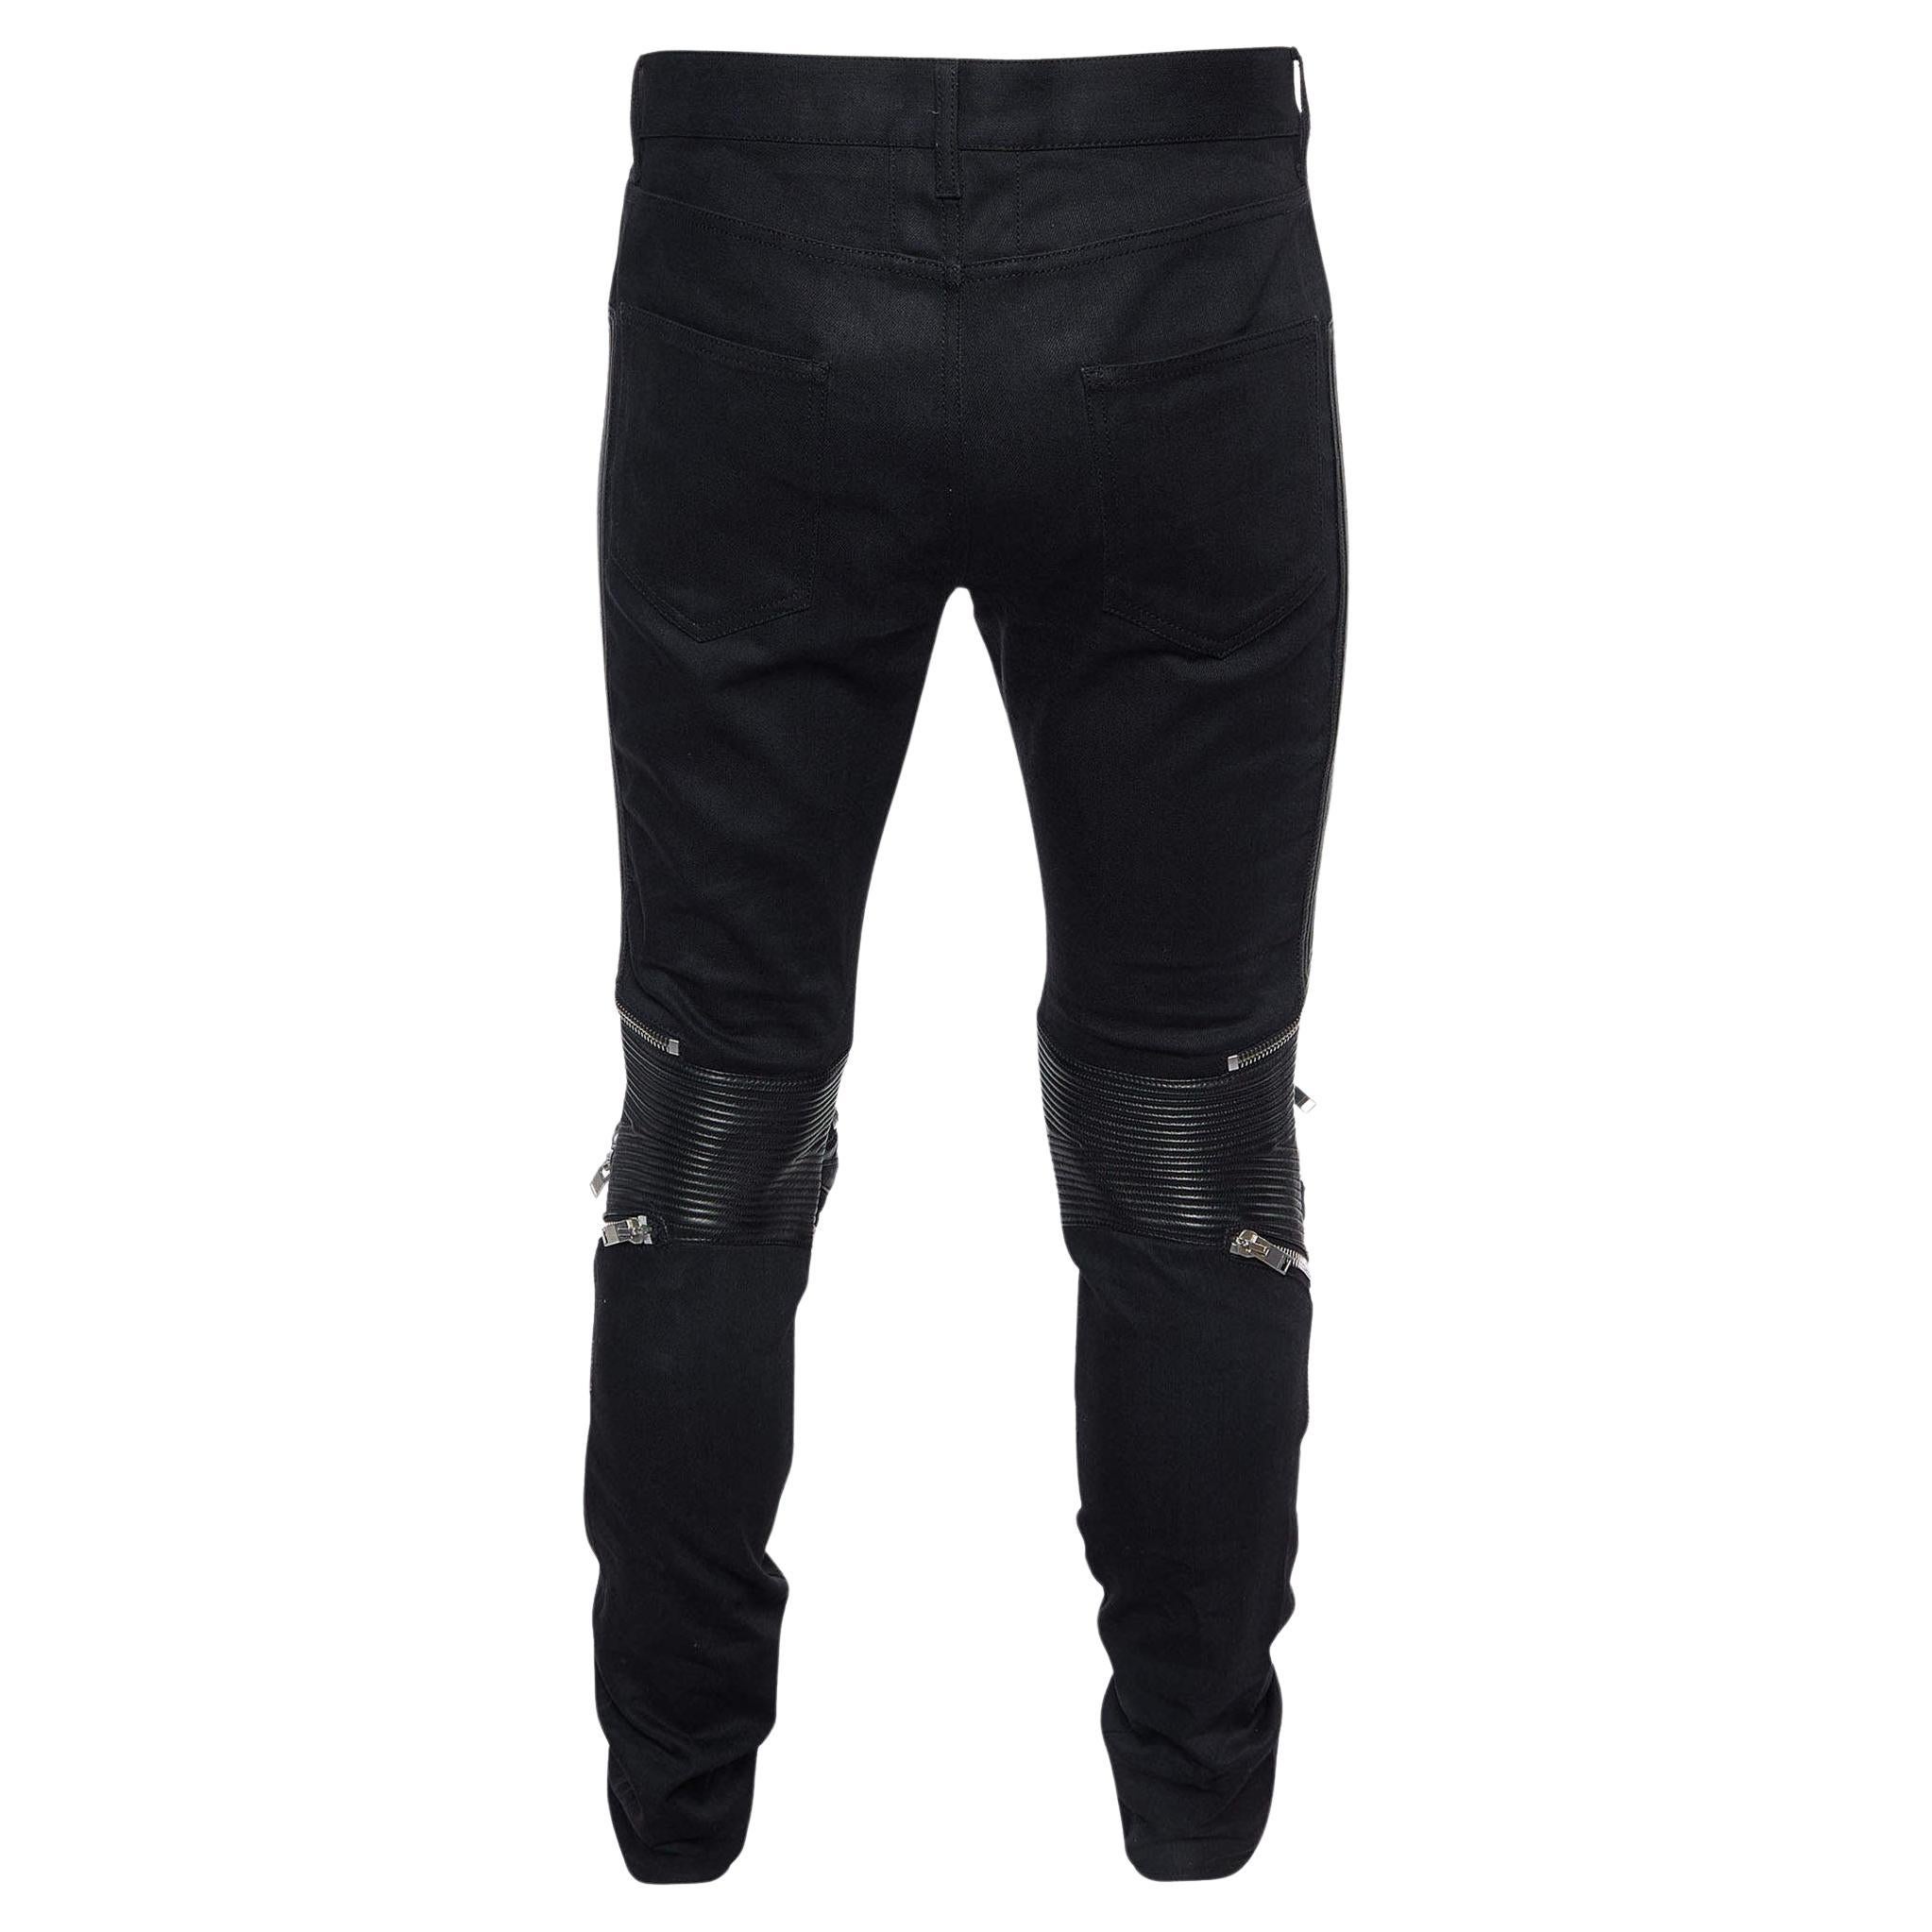 A good pair of jeans always makes the closet complete. This pair of jeans from Saint Laurent is tailored with such skill and panache that it will be your favorite in no time. It is tailored using quality fabric and gives you a comfortably stylish